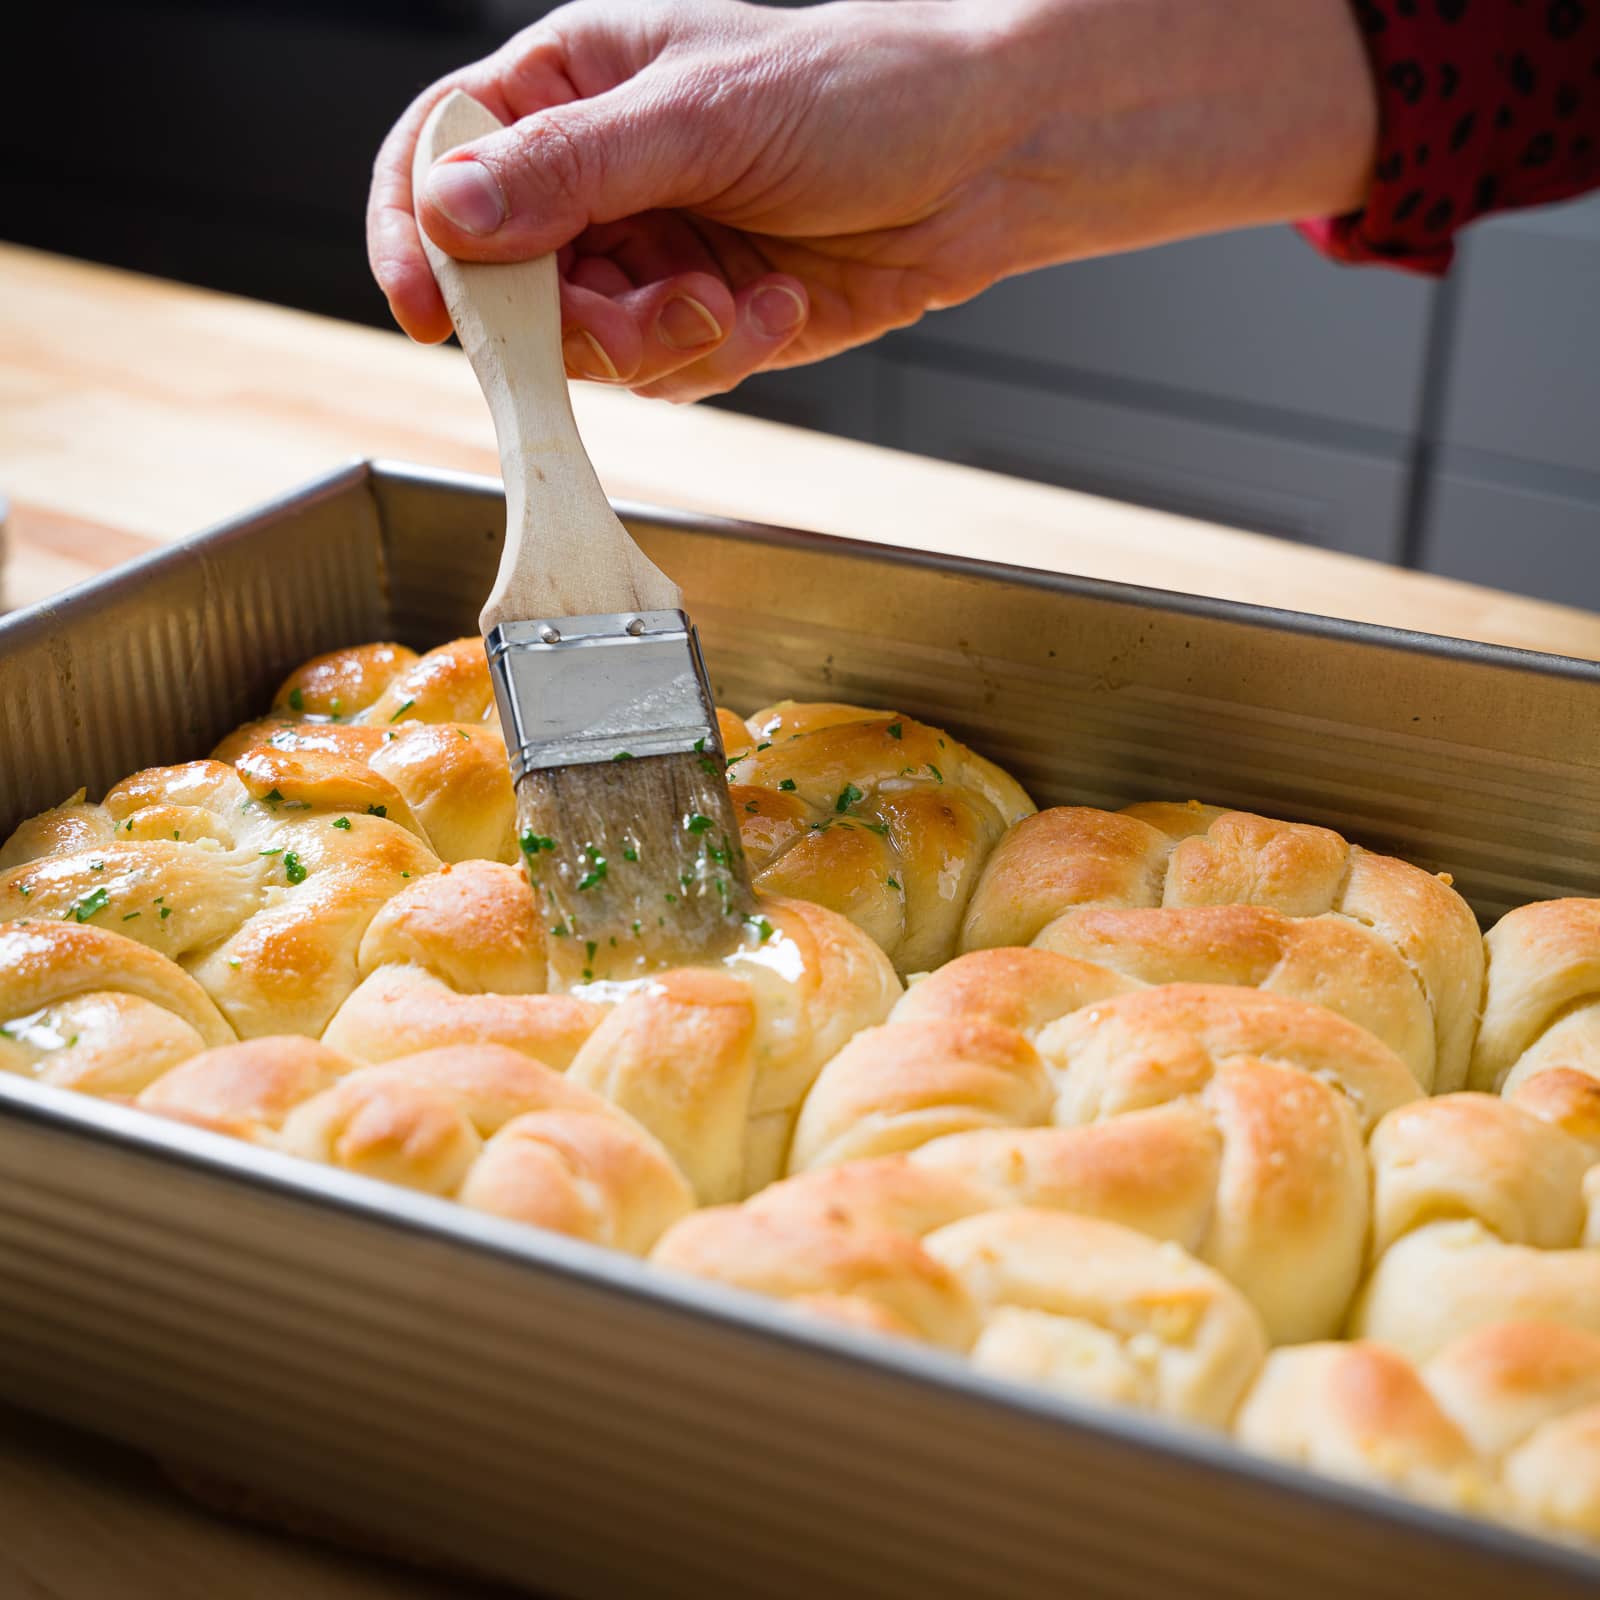 Brushing butter over the baked garlic knots